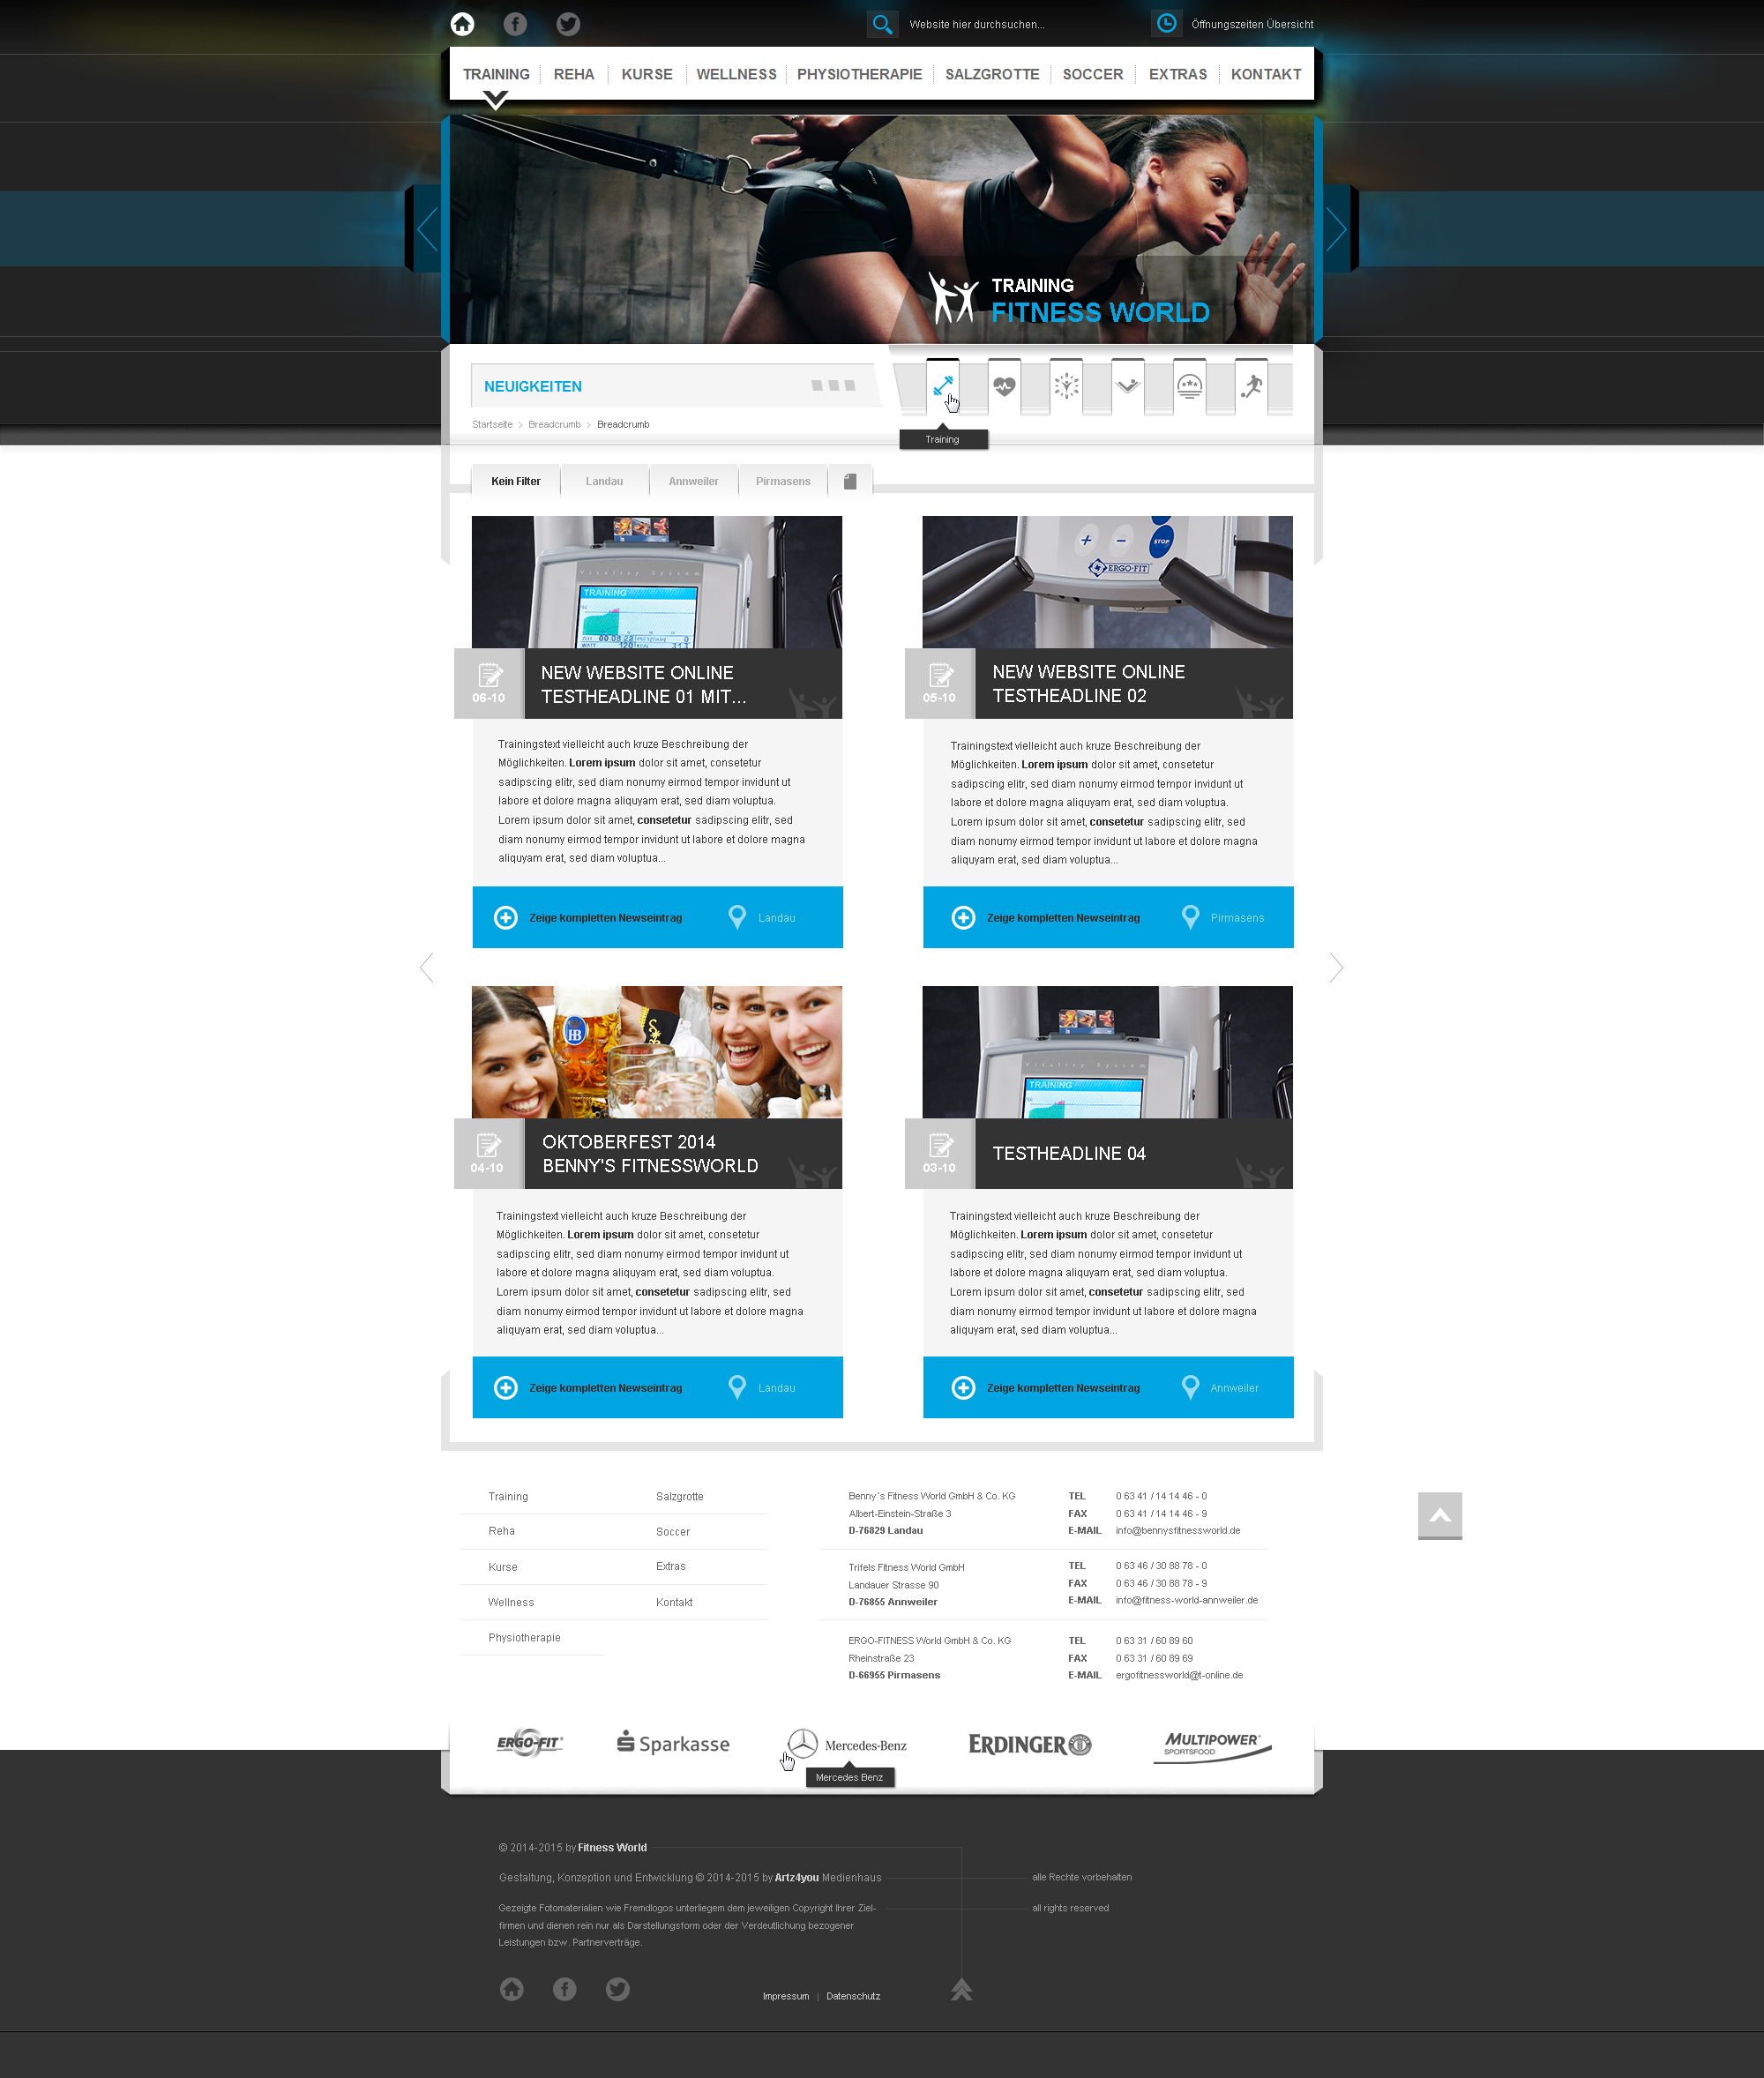 Webdesign © 2014 by Artz4you Medienhaus - all rights reserved